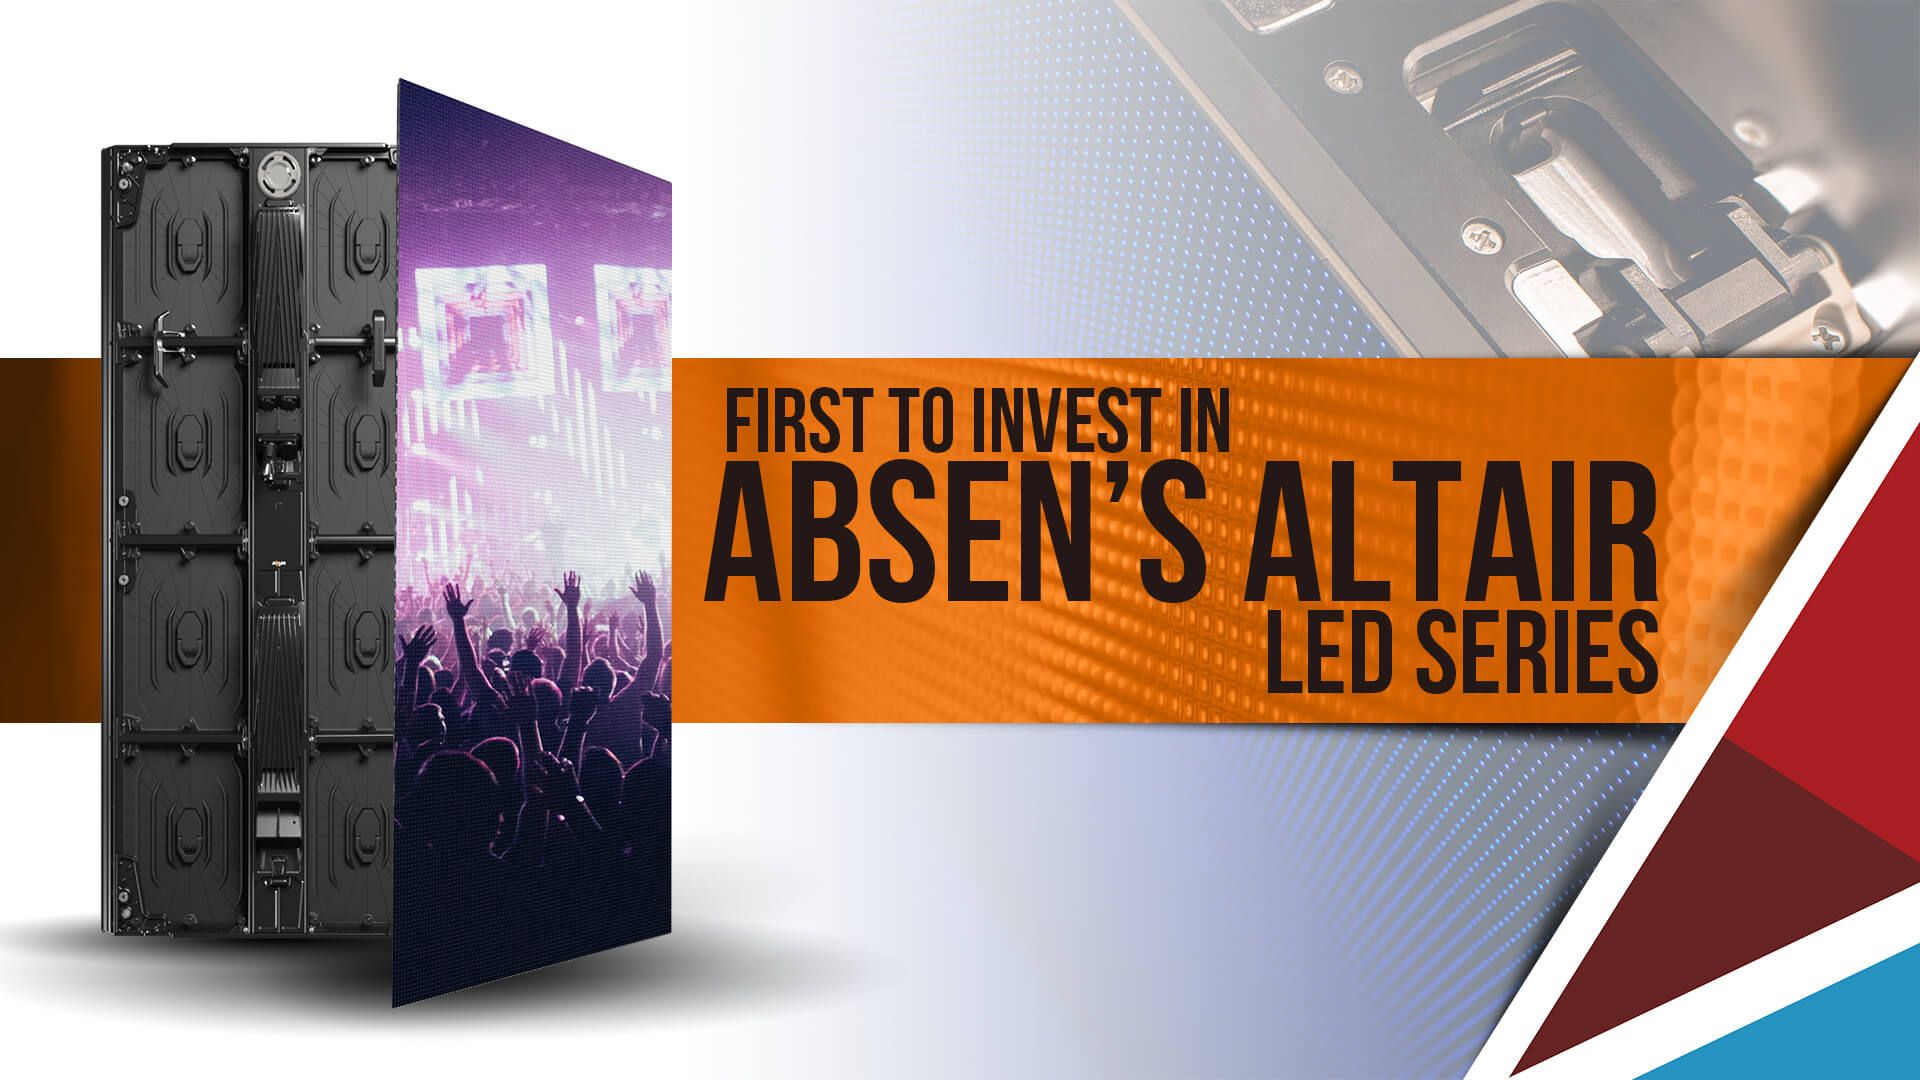 First investor in absen's altaire LED series for Audio Visual and Projection technologies.